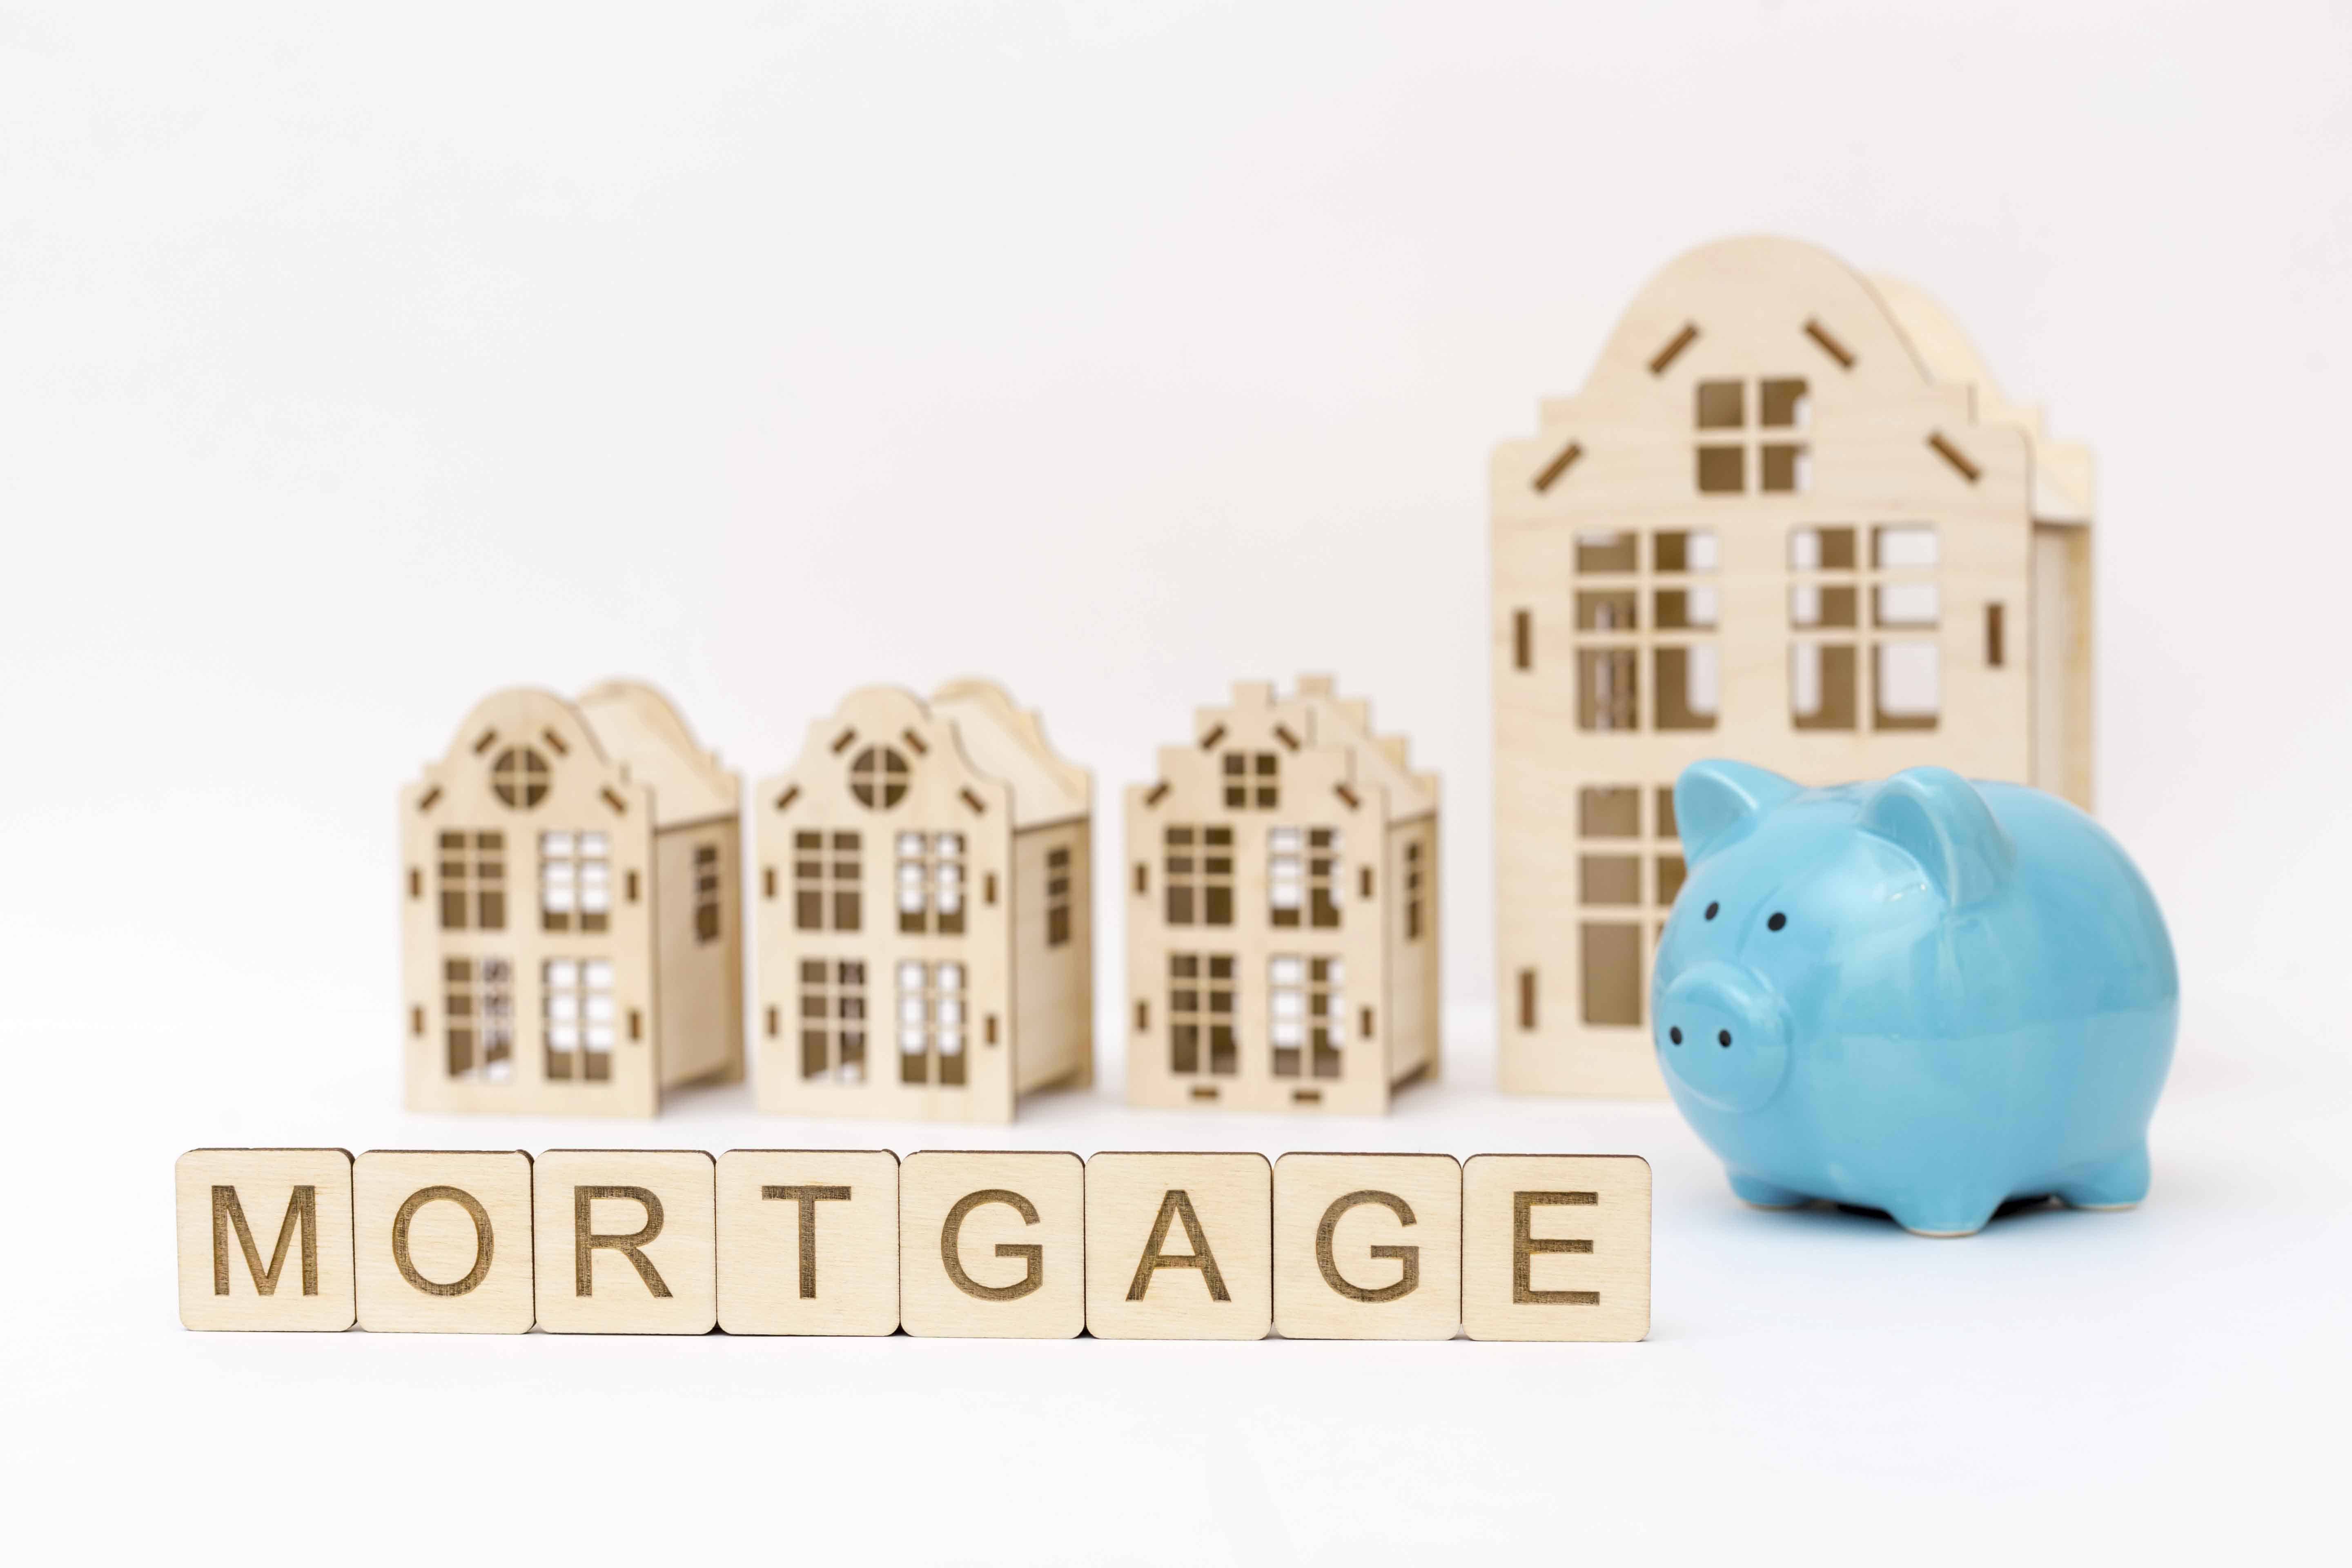 Blue piggy bank and wooden sign "mortgage" house model on background